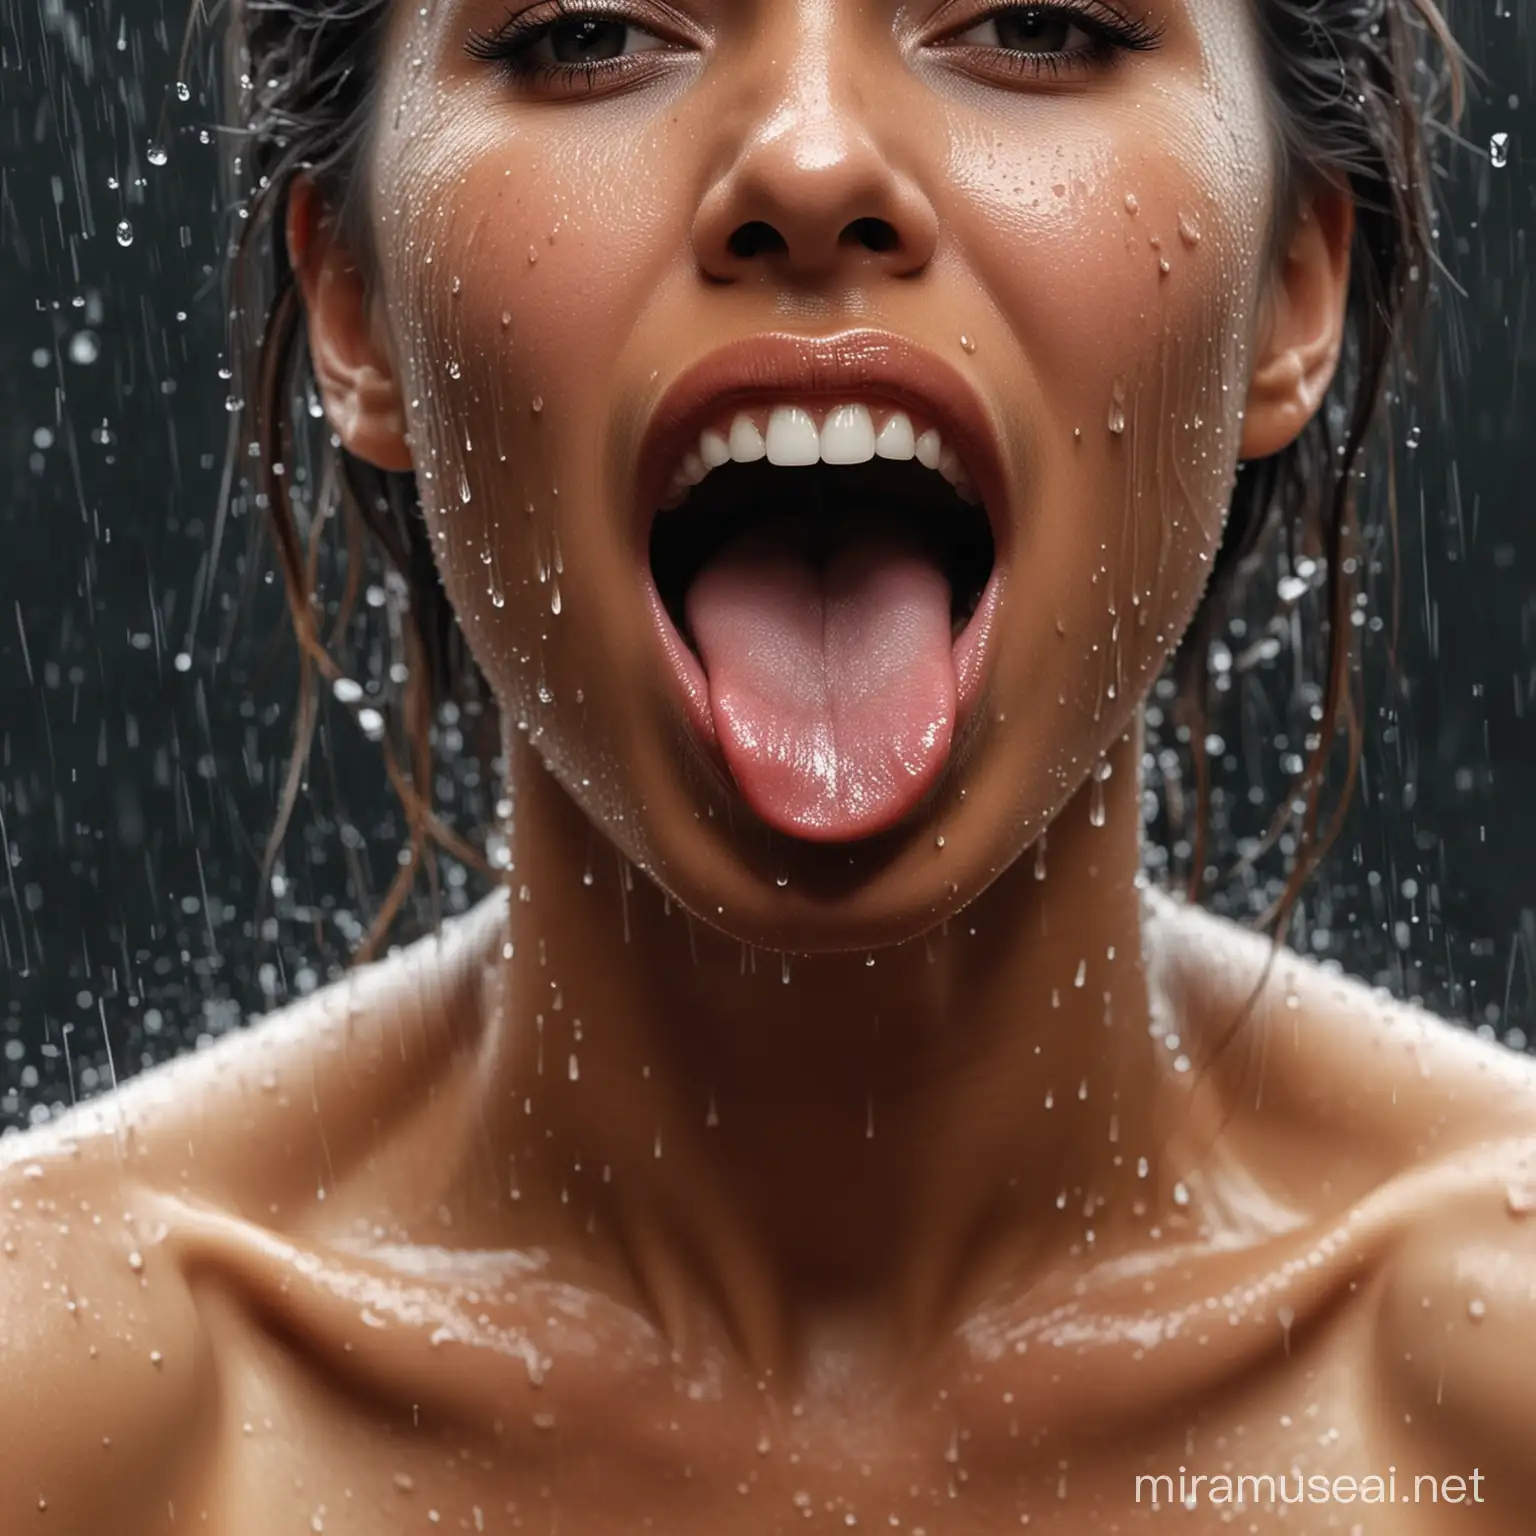 Woman Rain Portrait of a Beautiful Black Woman with Tongue Out